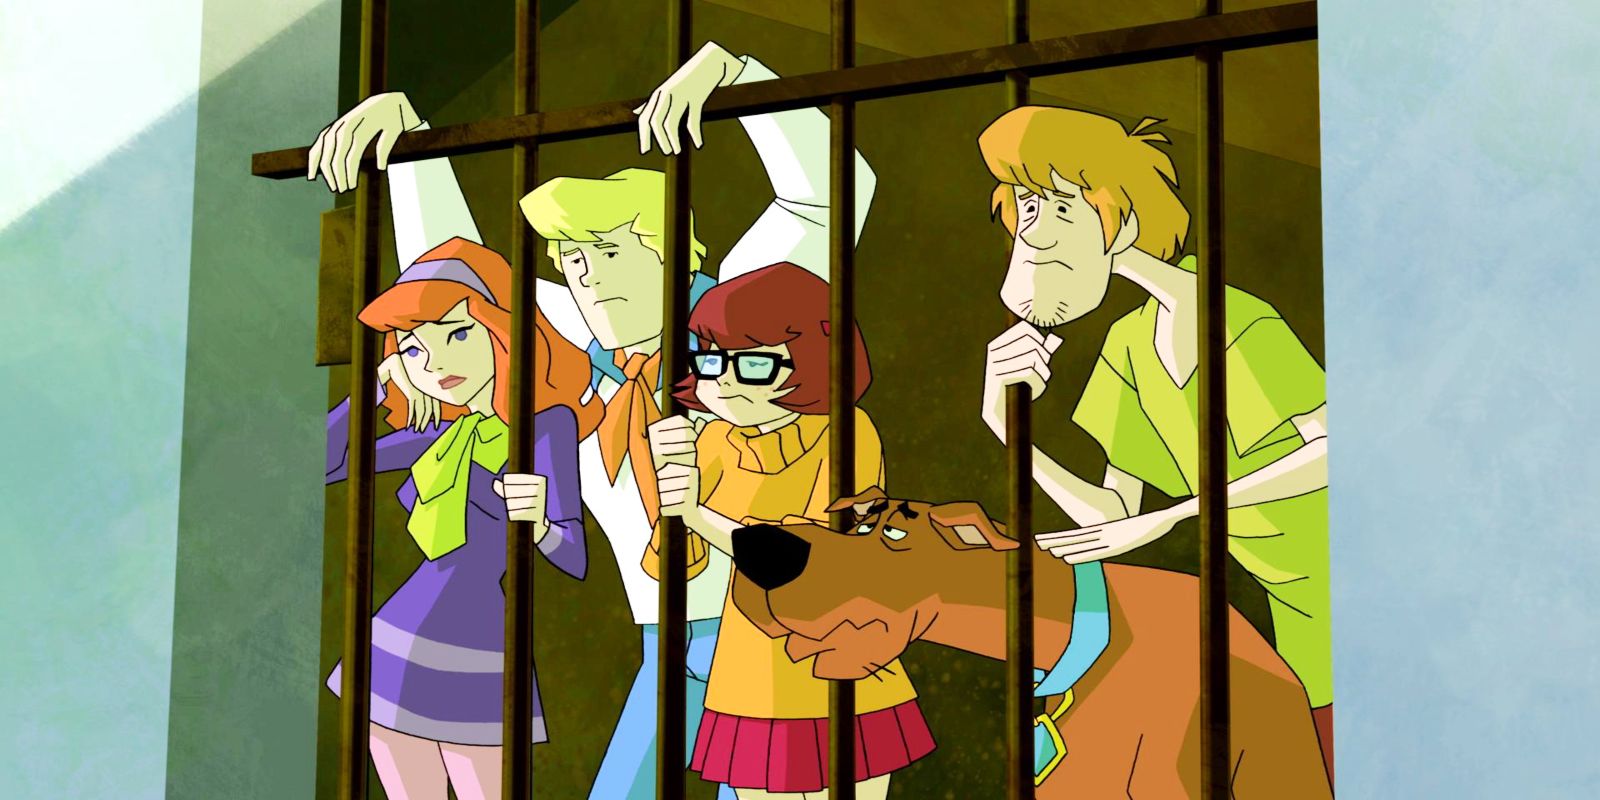 The Scooby-Doo crew behind bars in Scooby-Doo! Mystery Incorporated